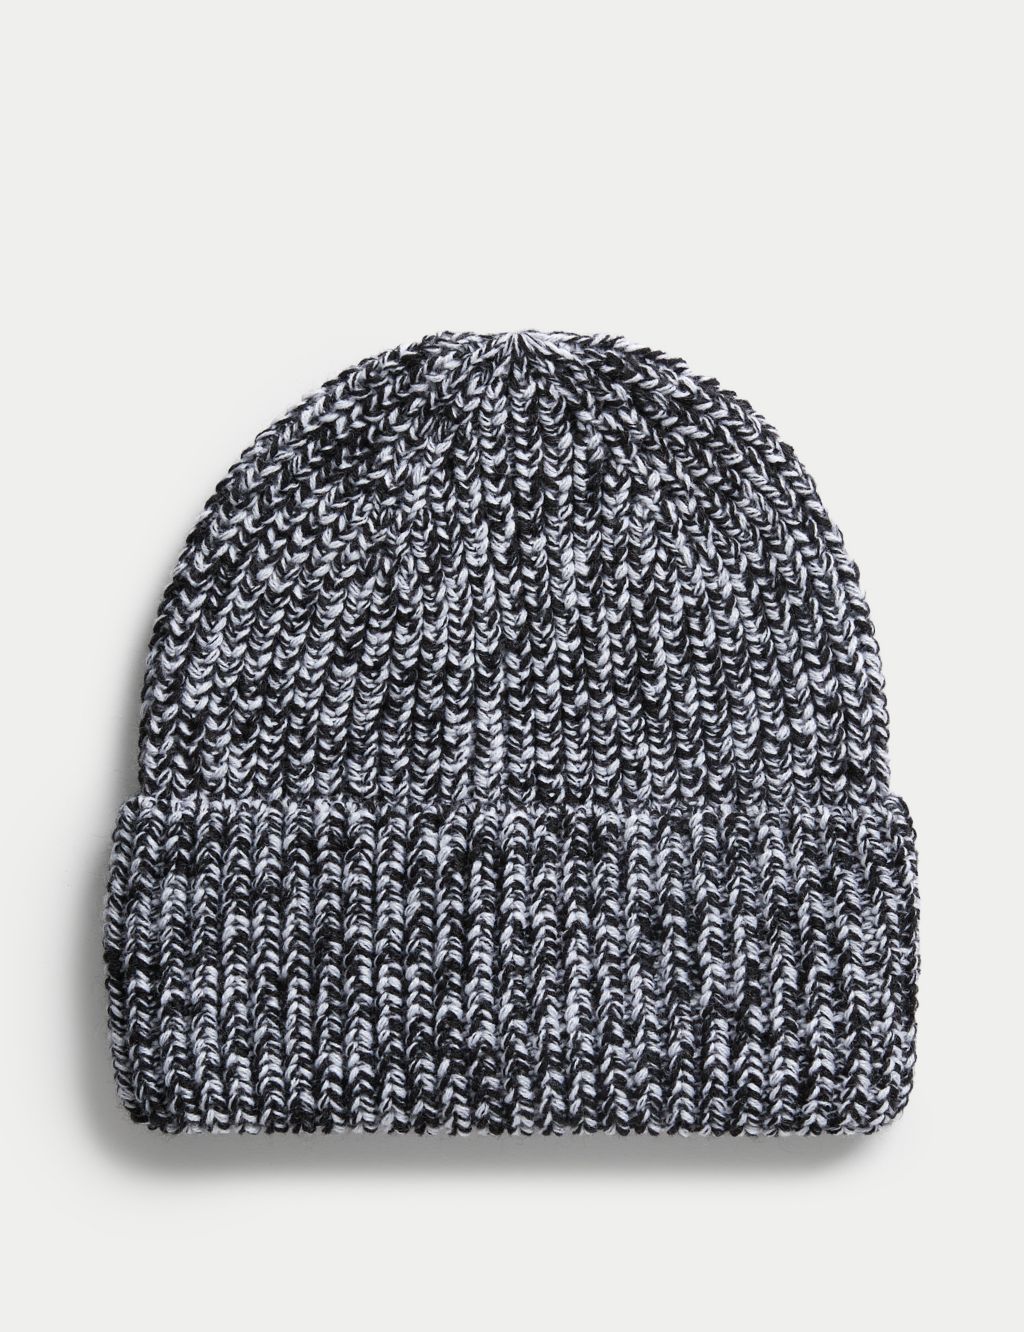 Knitted Chunky Turn Up Beanie Hat image 1